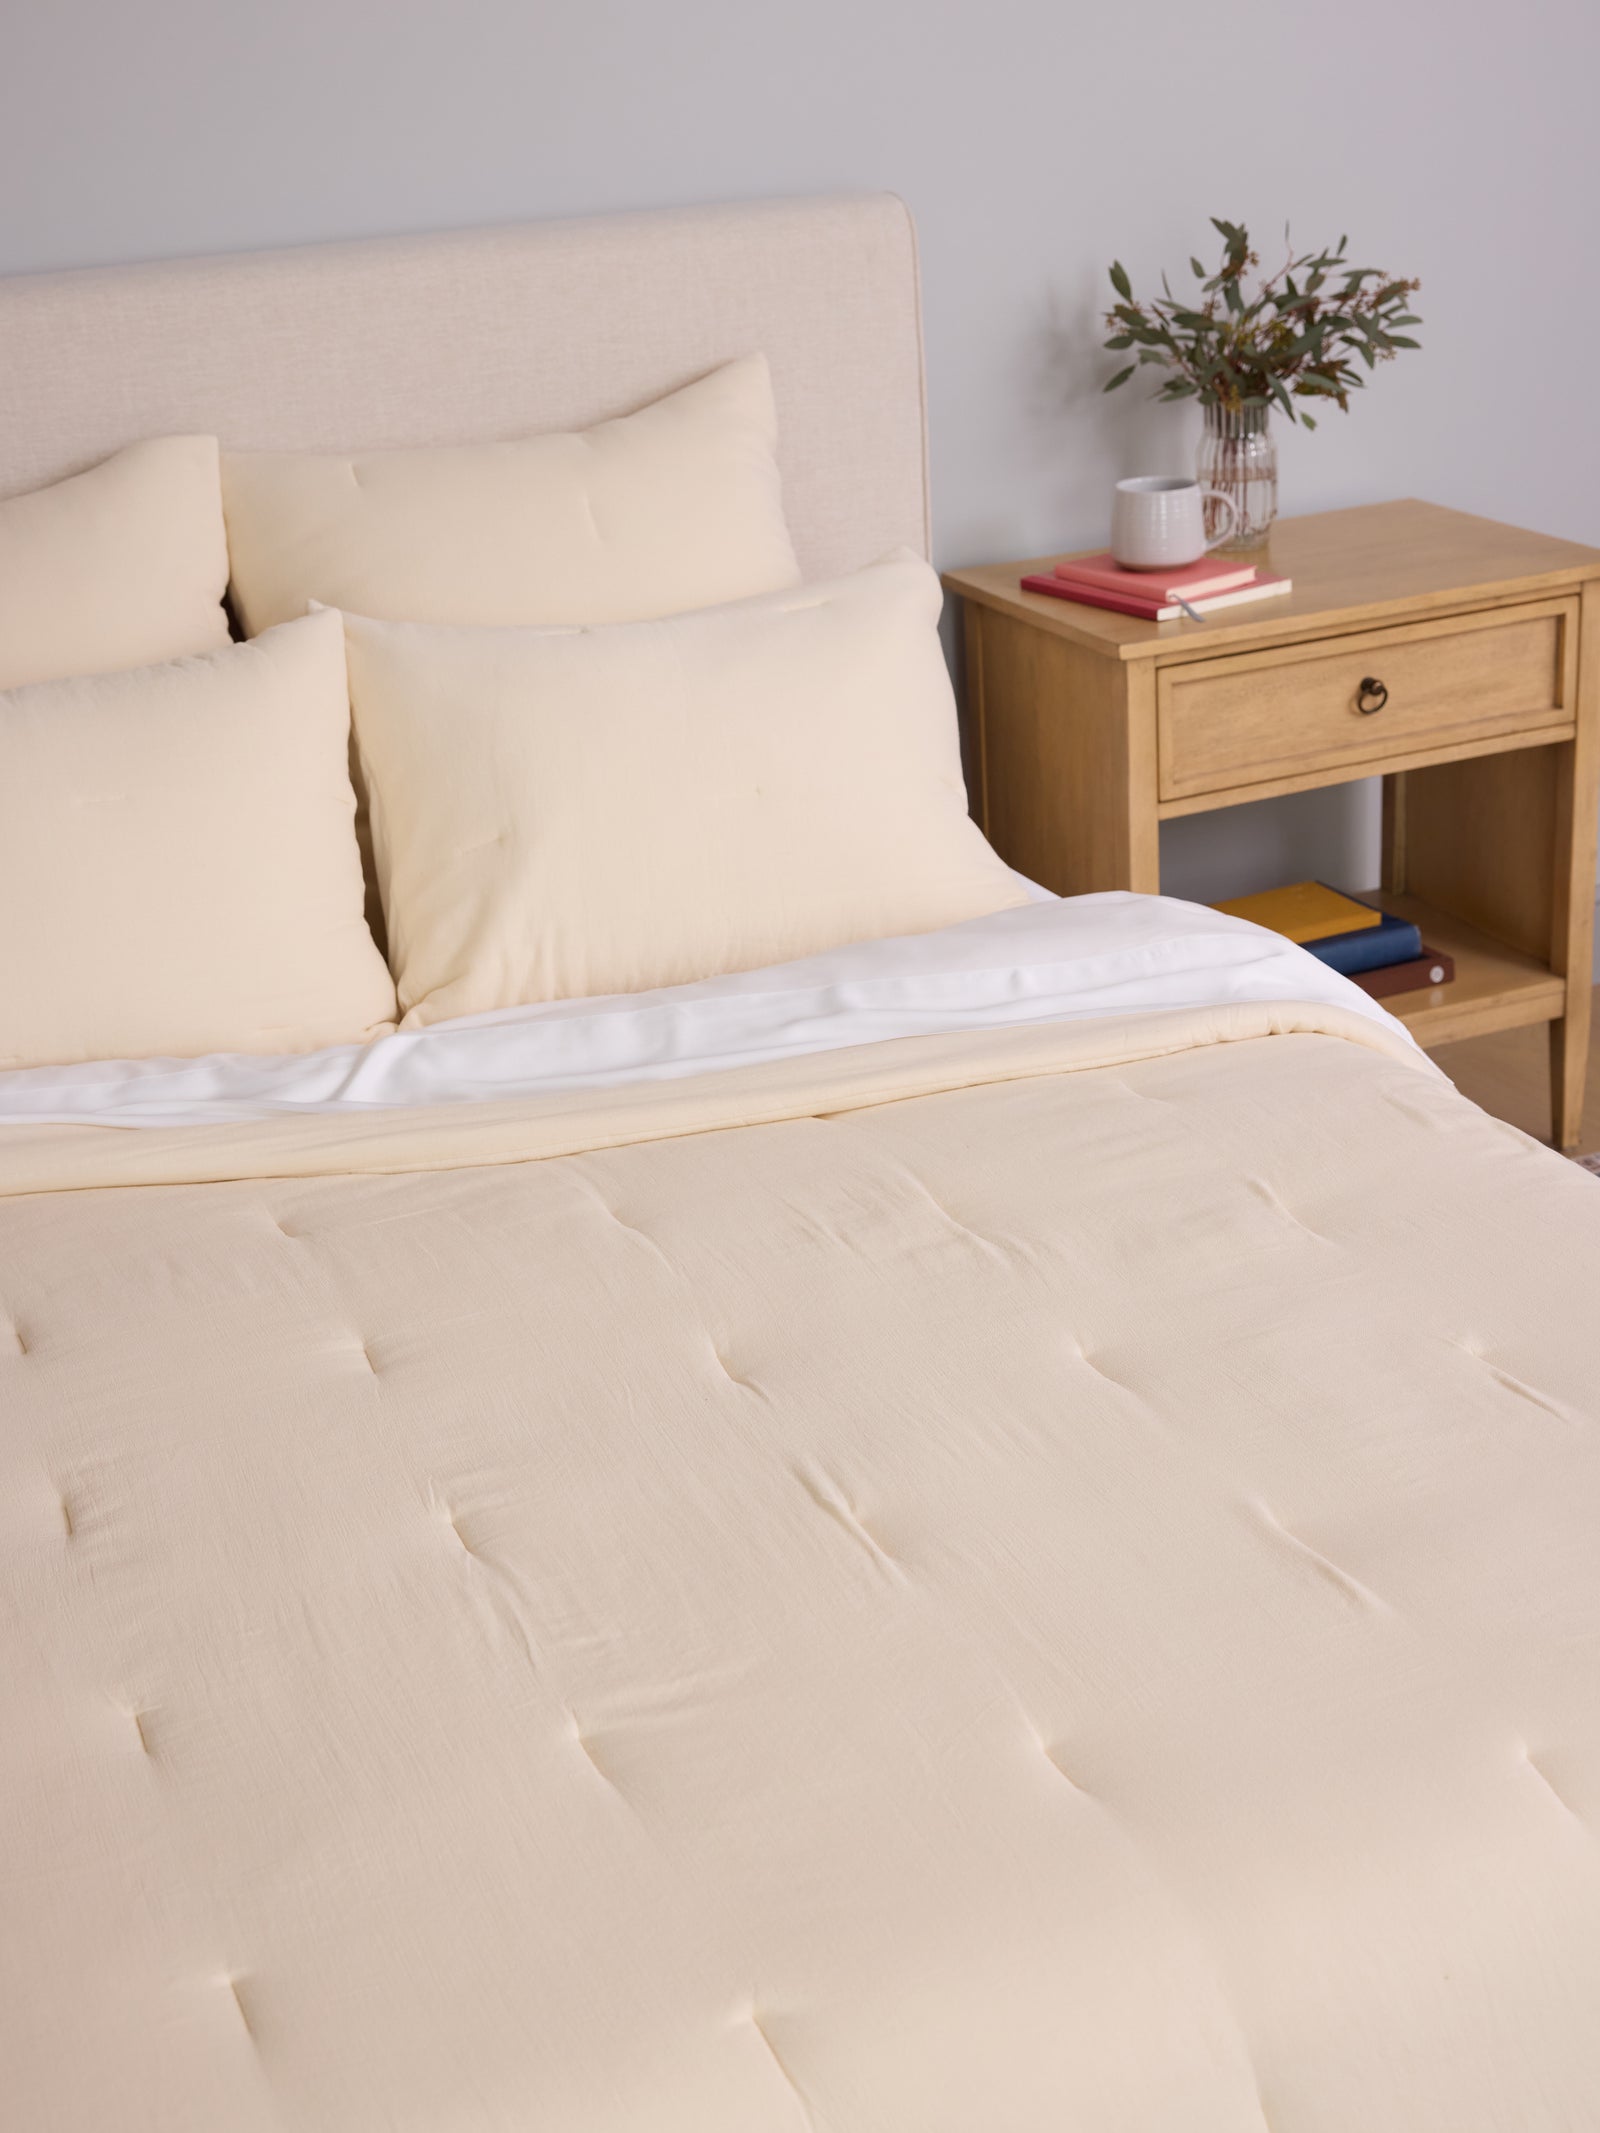 Buttermilk Aire Bamboo Puckered Shams. The sham is resting on a bed in a bedroom